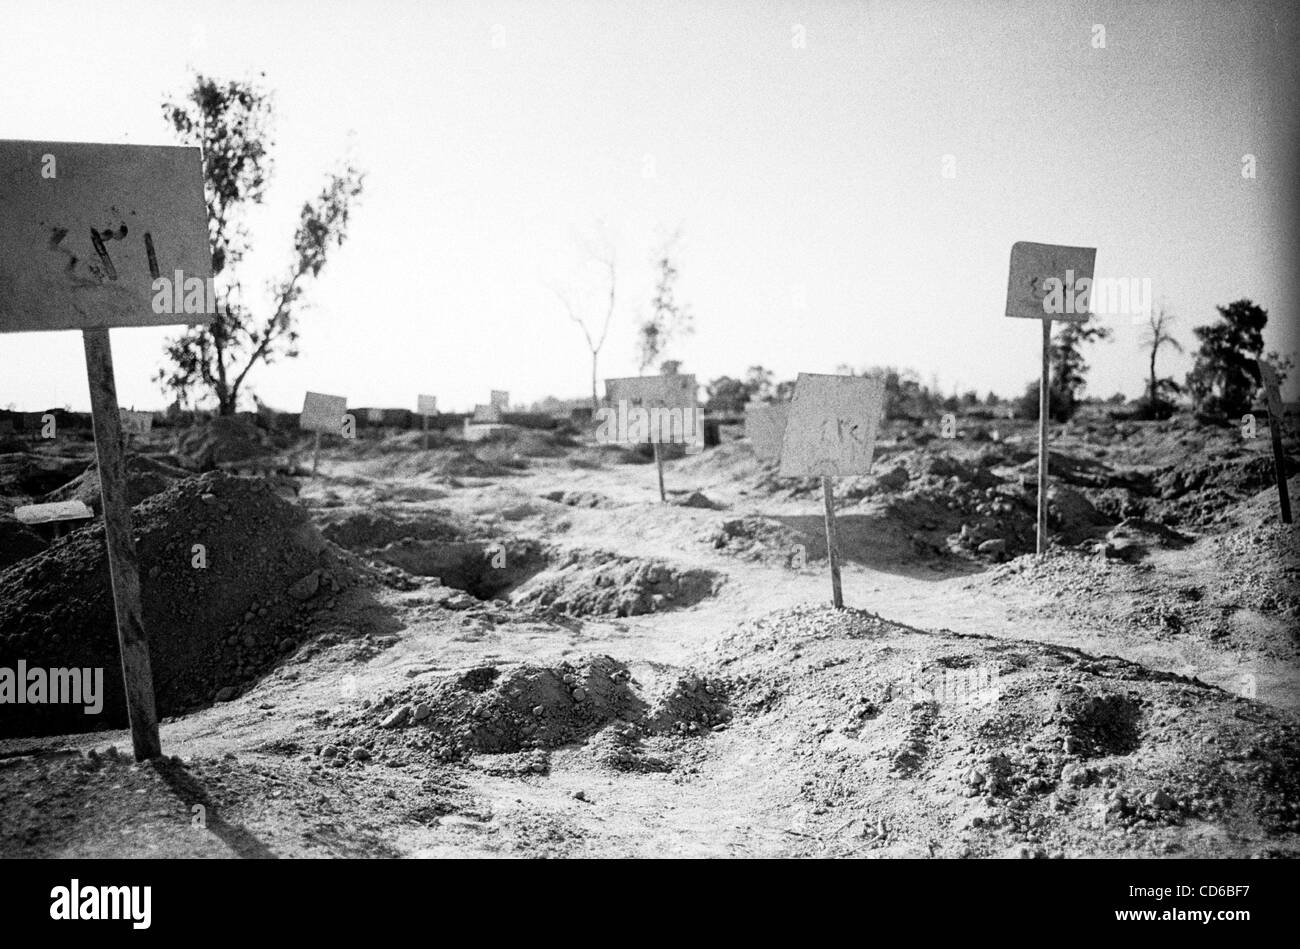 Jun 24, 2003 - Al-Musayab, Iraq - Inside the graveyard at Abu Ghraib, Iraq, next to the prison, a walled-off plot held the remains of prisoners who were executed during the fighting. Most of the graves are exhumed.  (Credit Image: © David I. Gross/ZUMAPRESS.com) Stock Photo